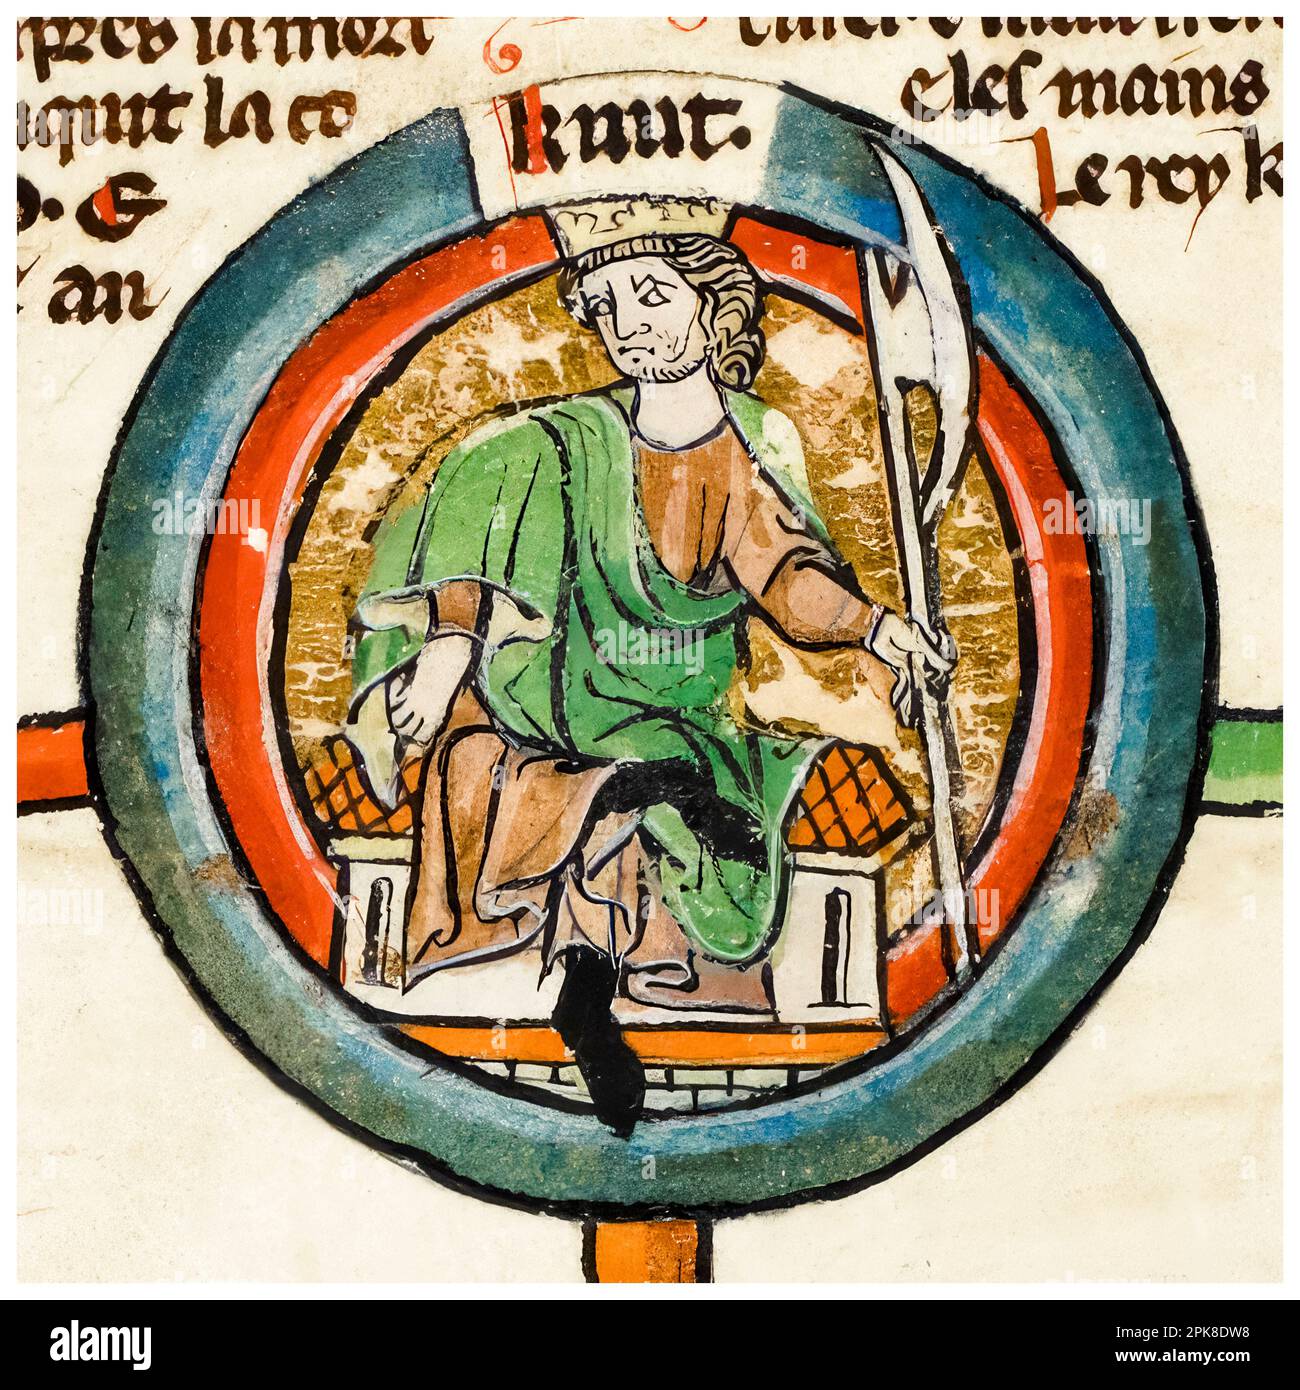 Cnut: Why The Norse King Who Ruled England Is Known As 'The Great